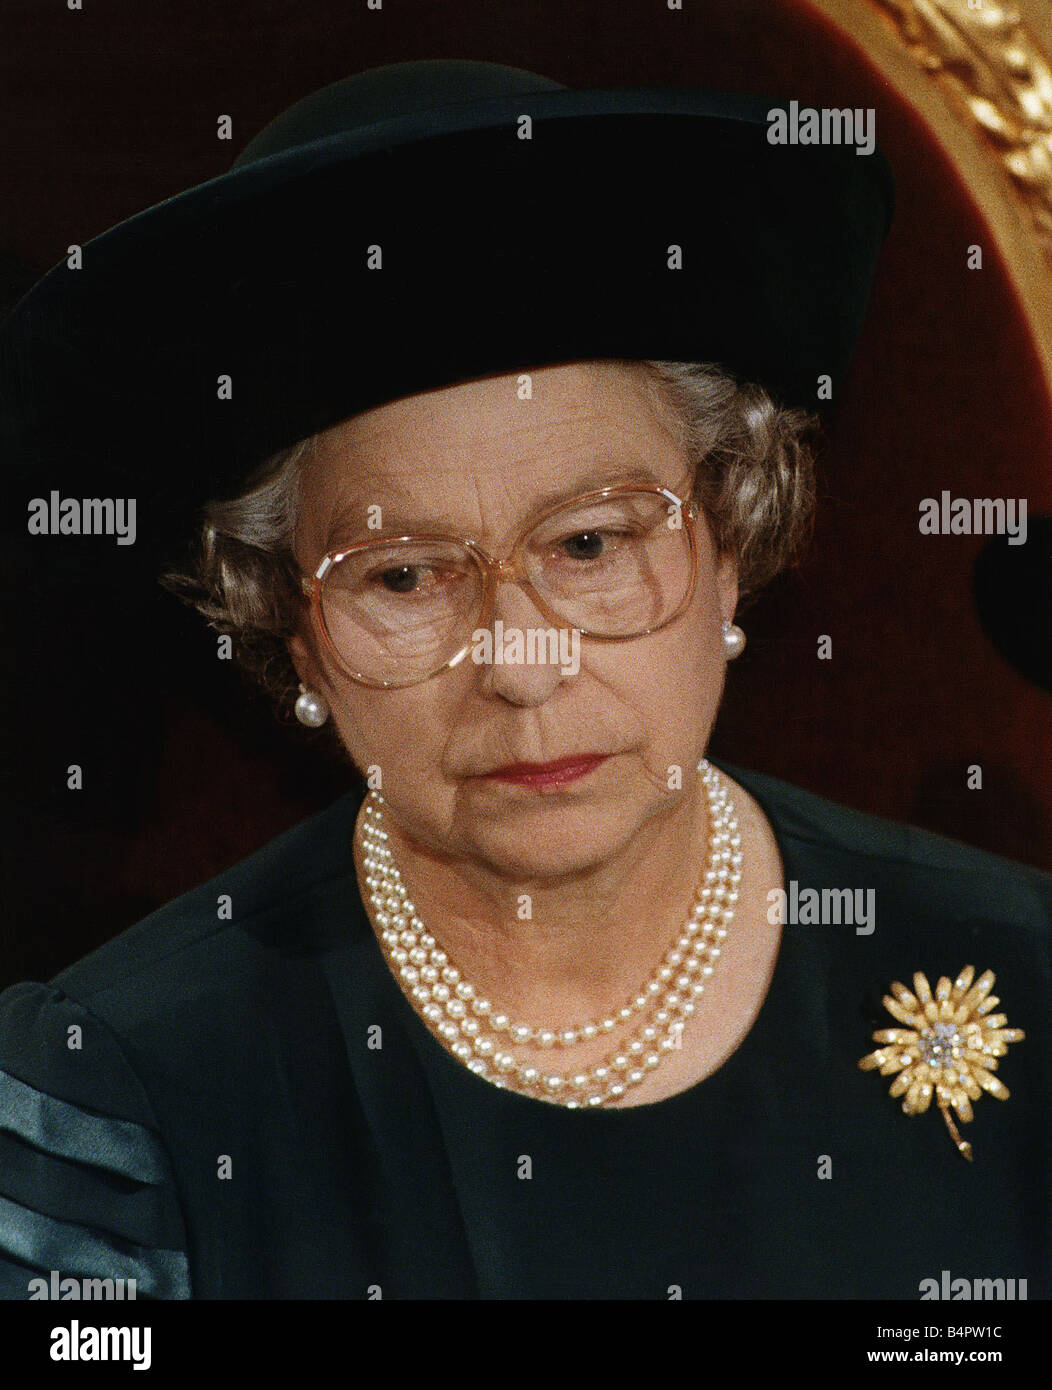 Queen Elizabeth wearing glasses Recent family problems took their toll on  Her Highness Stock Photo - Alamy